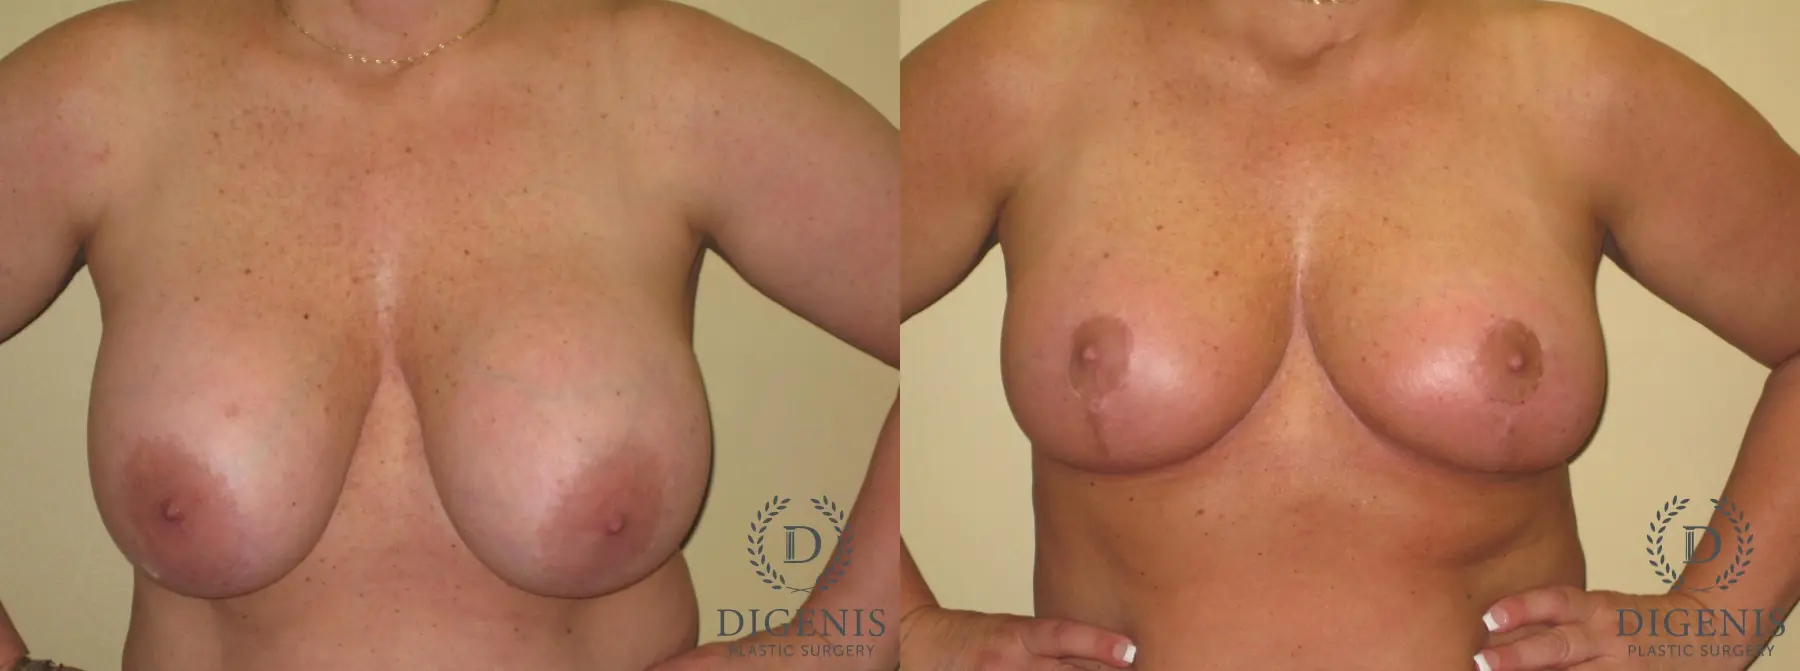 Breast Lift With Implants: Patient 7 - Before and After  